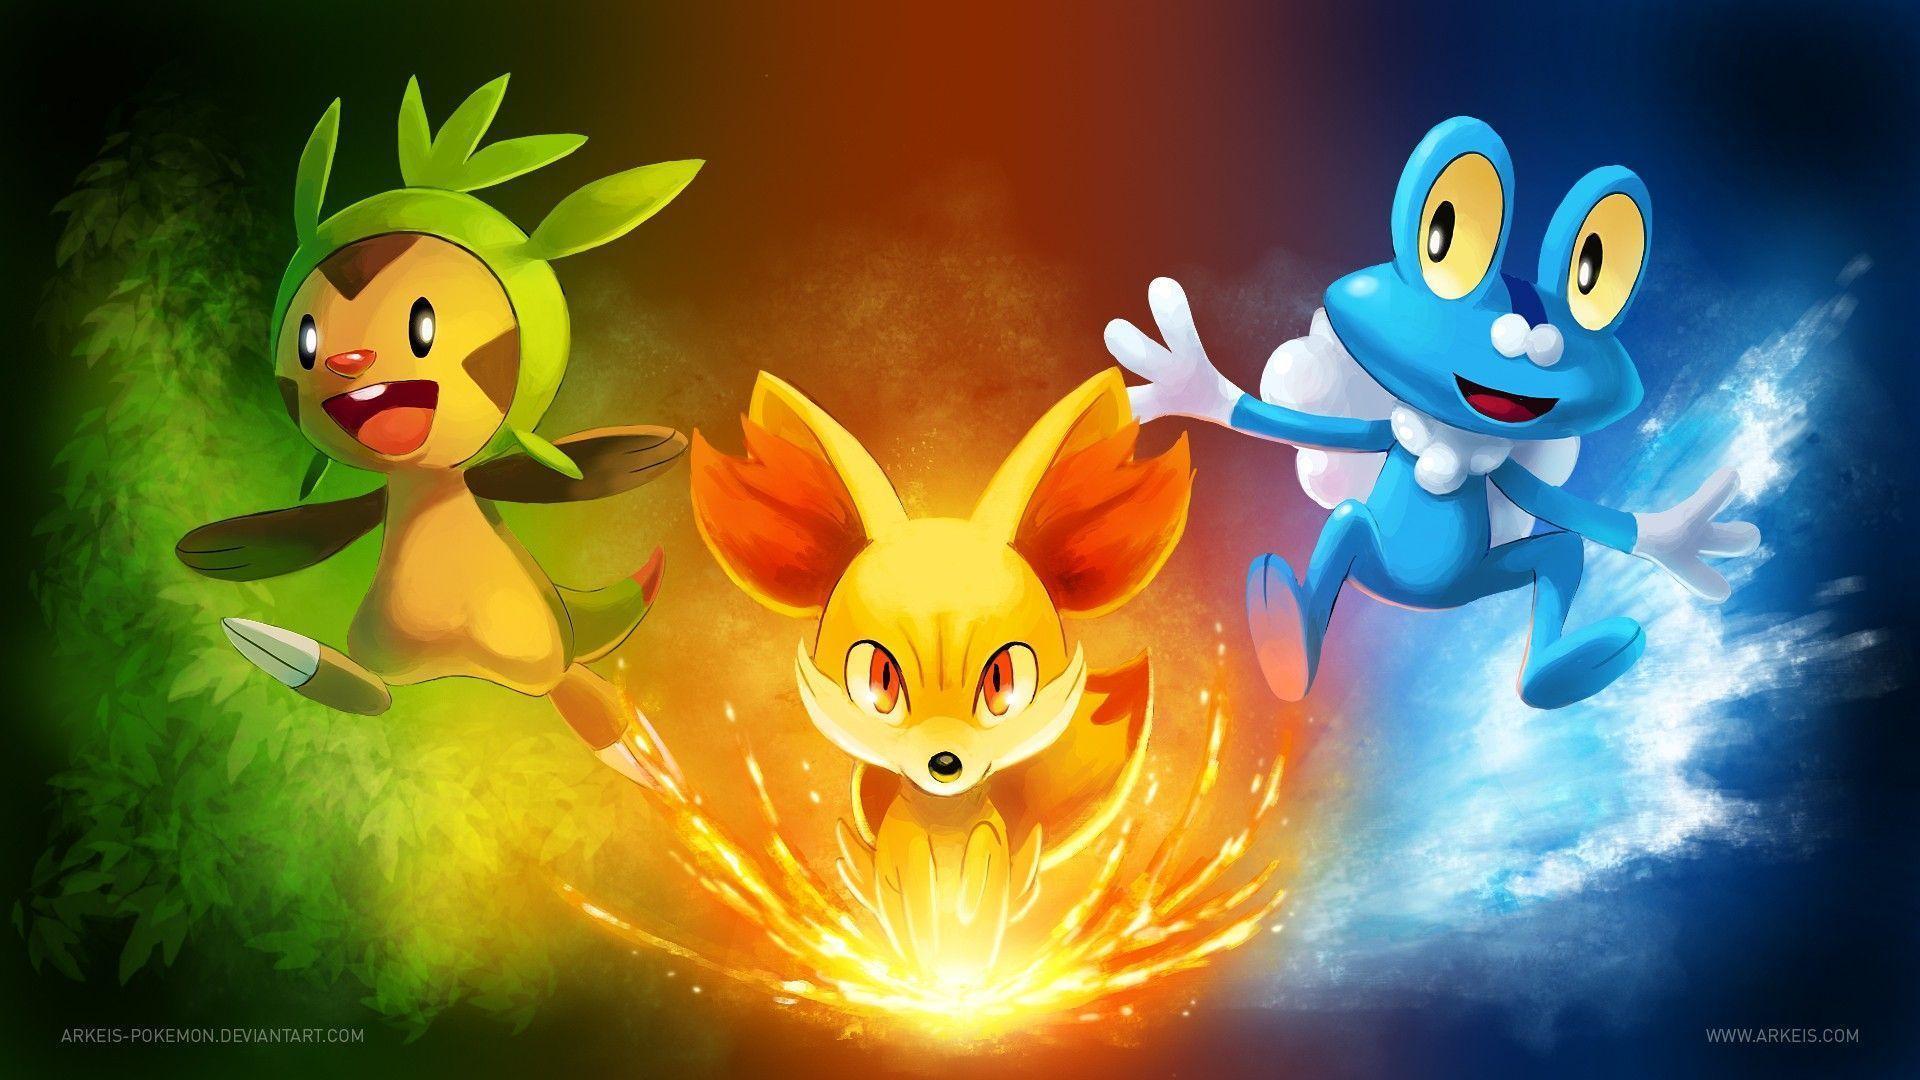 Wallpapers For > Pokemon Backgrounds Hd